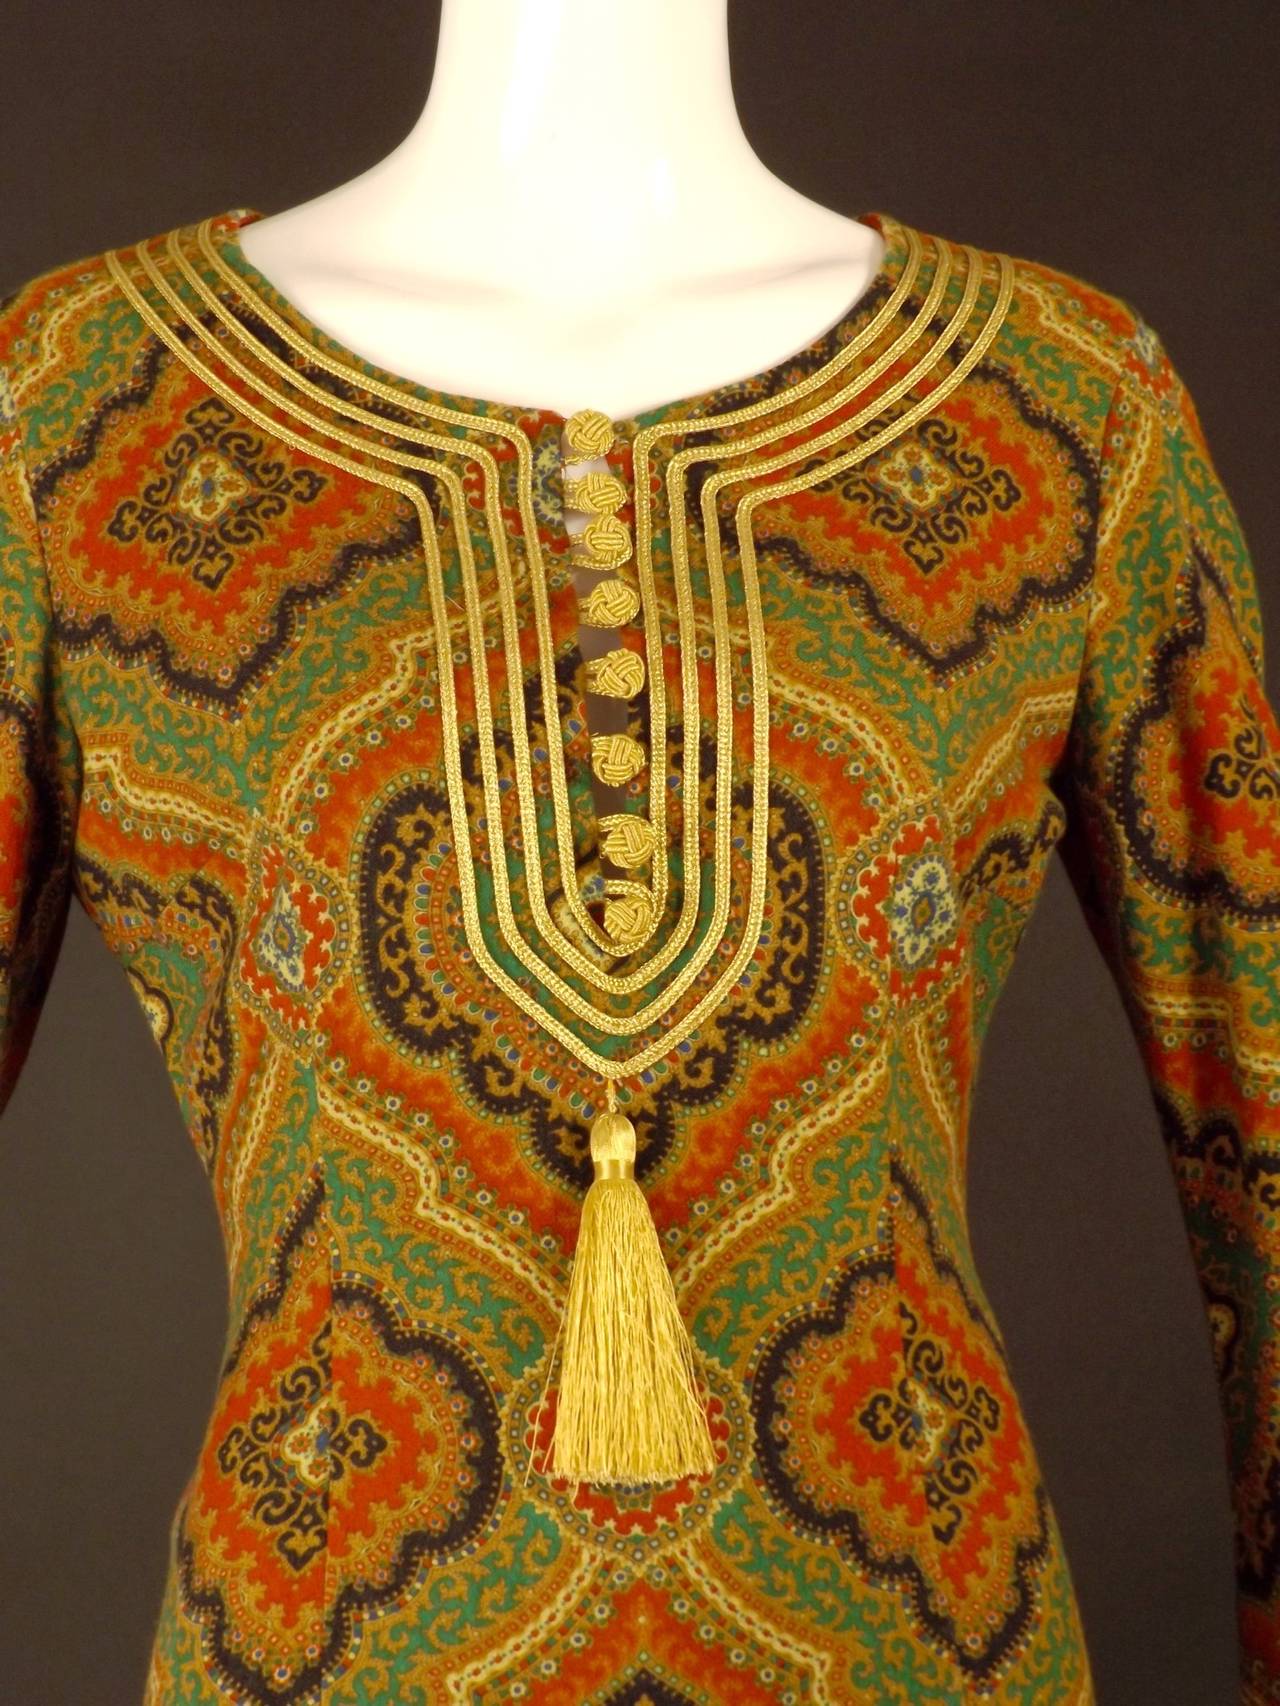 Gorgeous ethnic style dress from the 1990s to early 2000's. The dress is a very soft wool with a pattern in black, red, gold, green, blue and white. God ribbon trimmed neckline with French knot and loop buttons down the front slit. A gold tassel